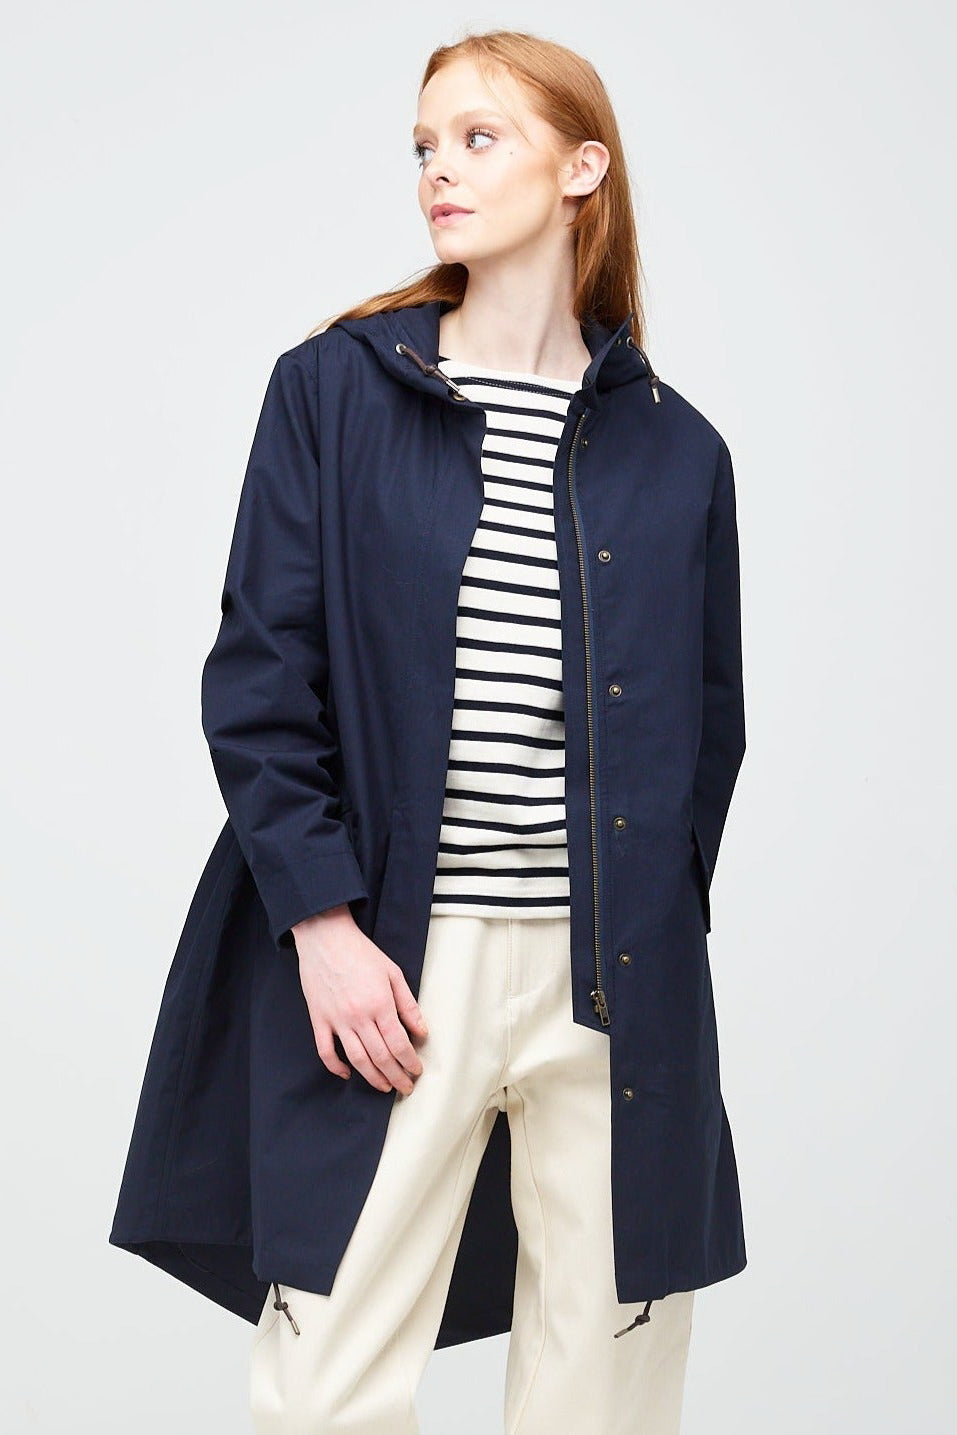 
            A young, white female model with ginger hair looking to the left wearing a long navy parka unzipped. The parka is styled with a navy striped breton top &amp; ecru jeans.